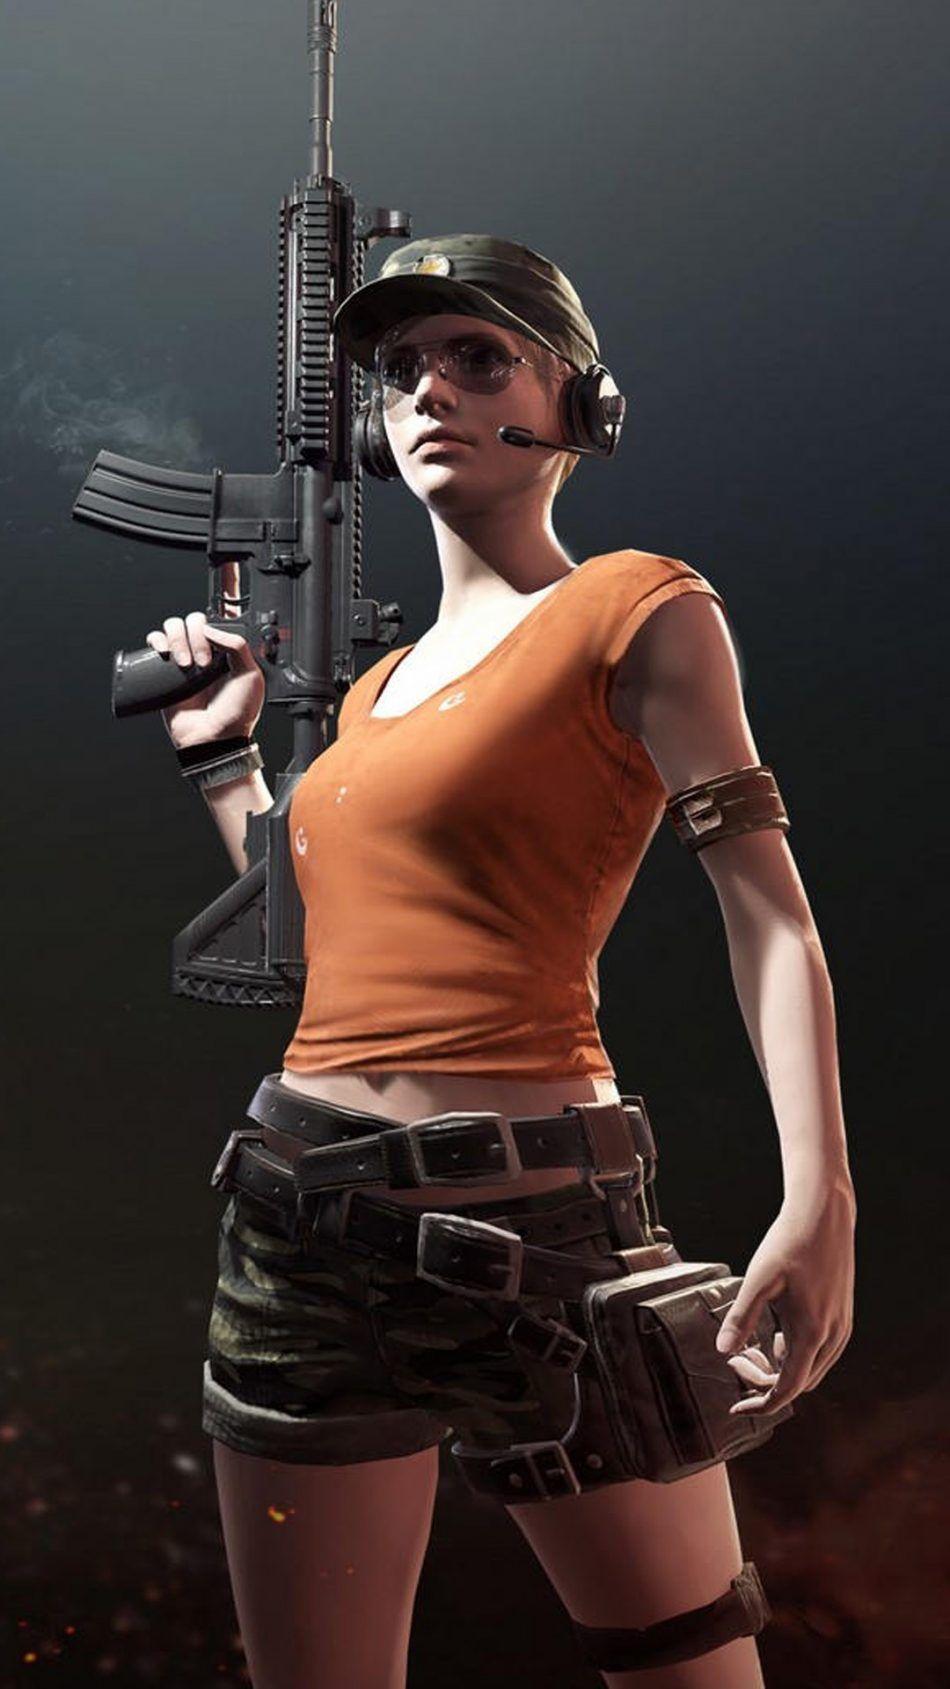 PUBG Female Player With Hat And Headphone 4K Ultra HD Mobile Wallpaper. Cool nike wallpaper, Mobile wallpaper, Android wallpaper